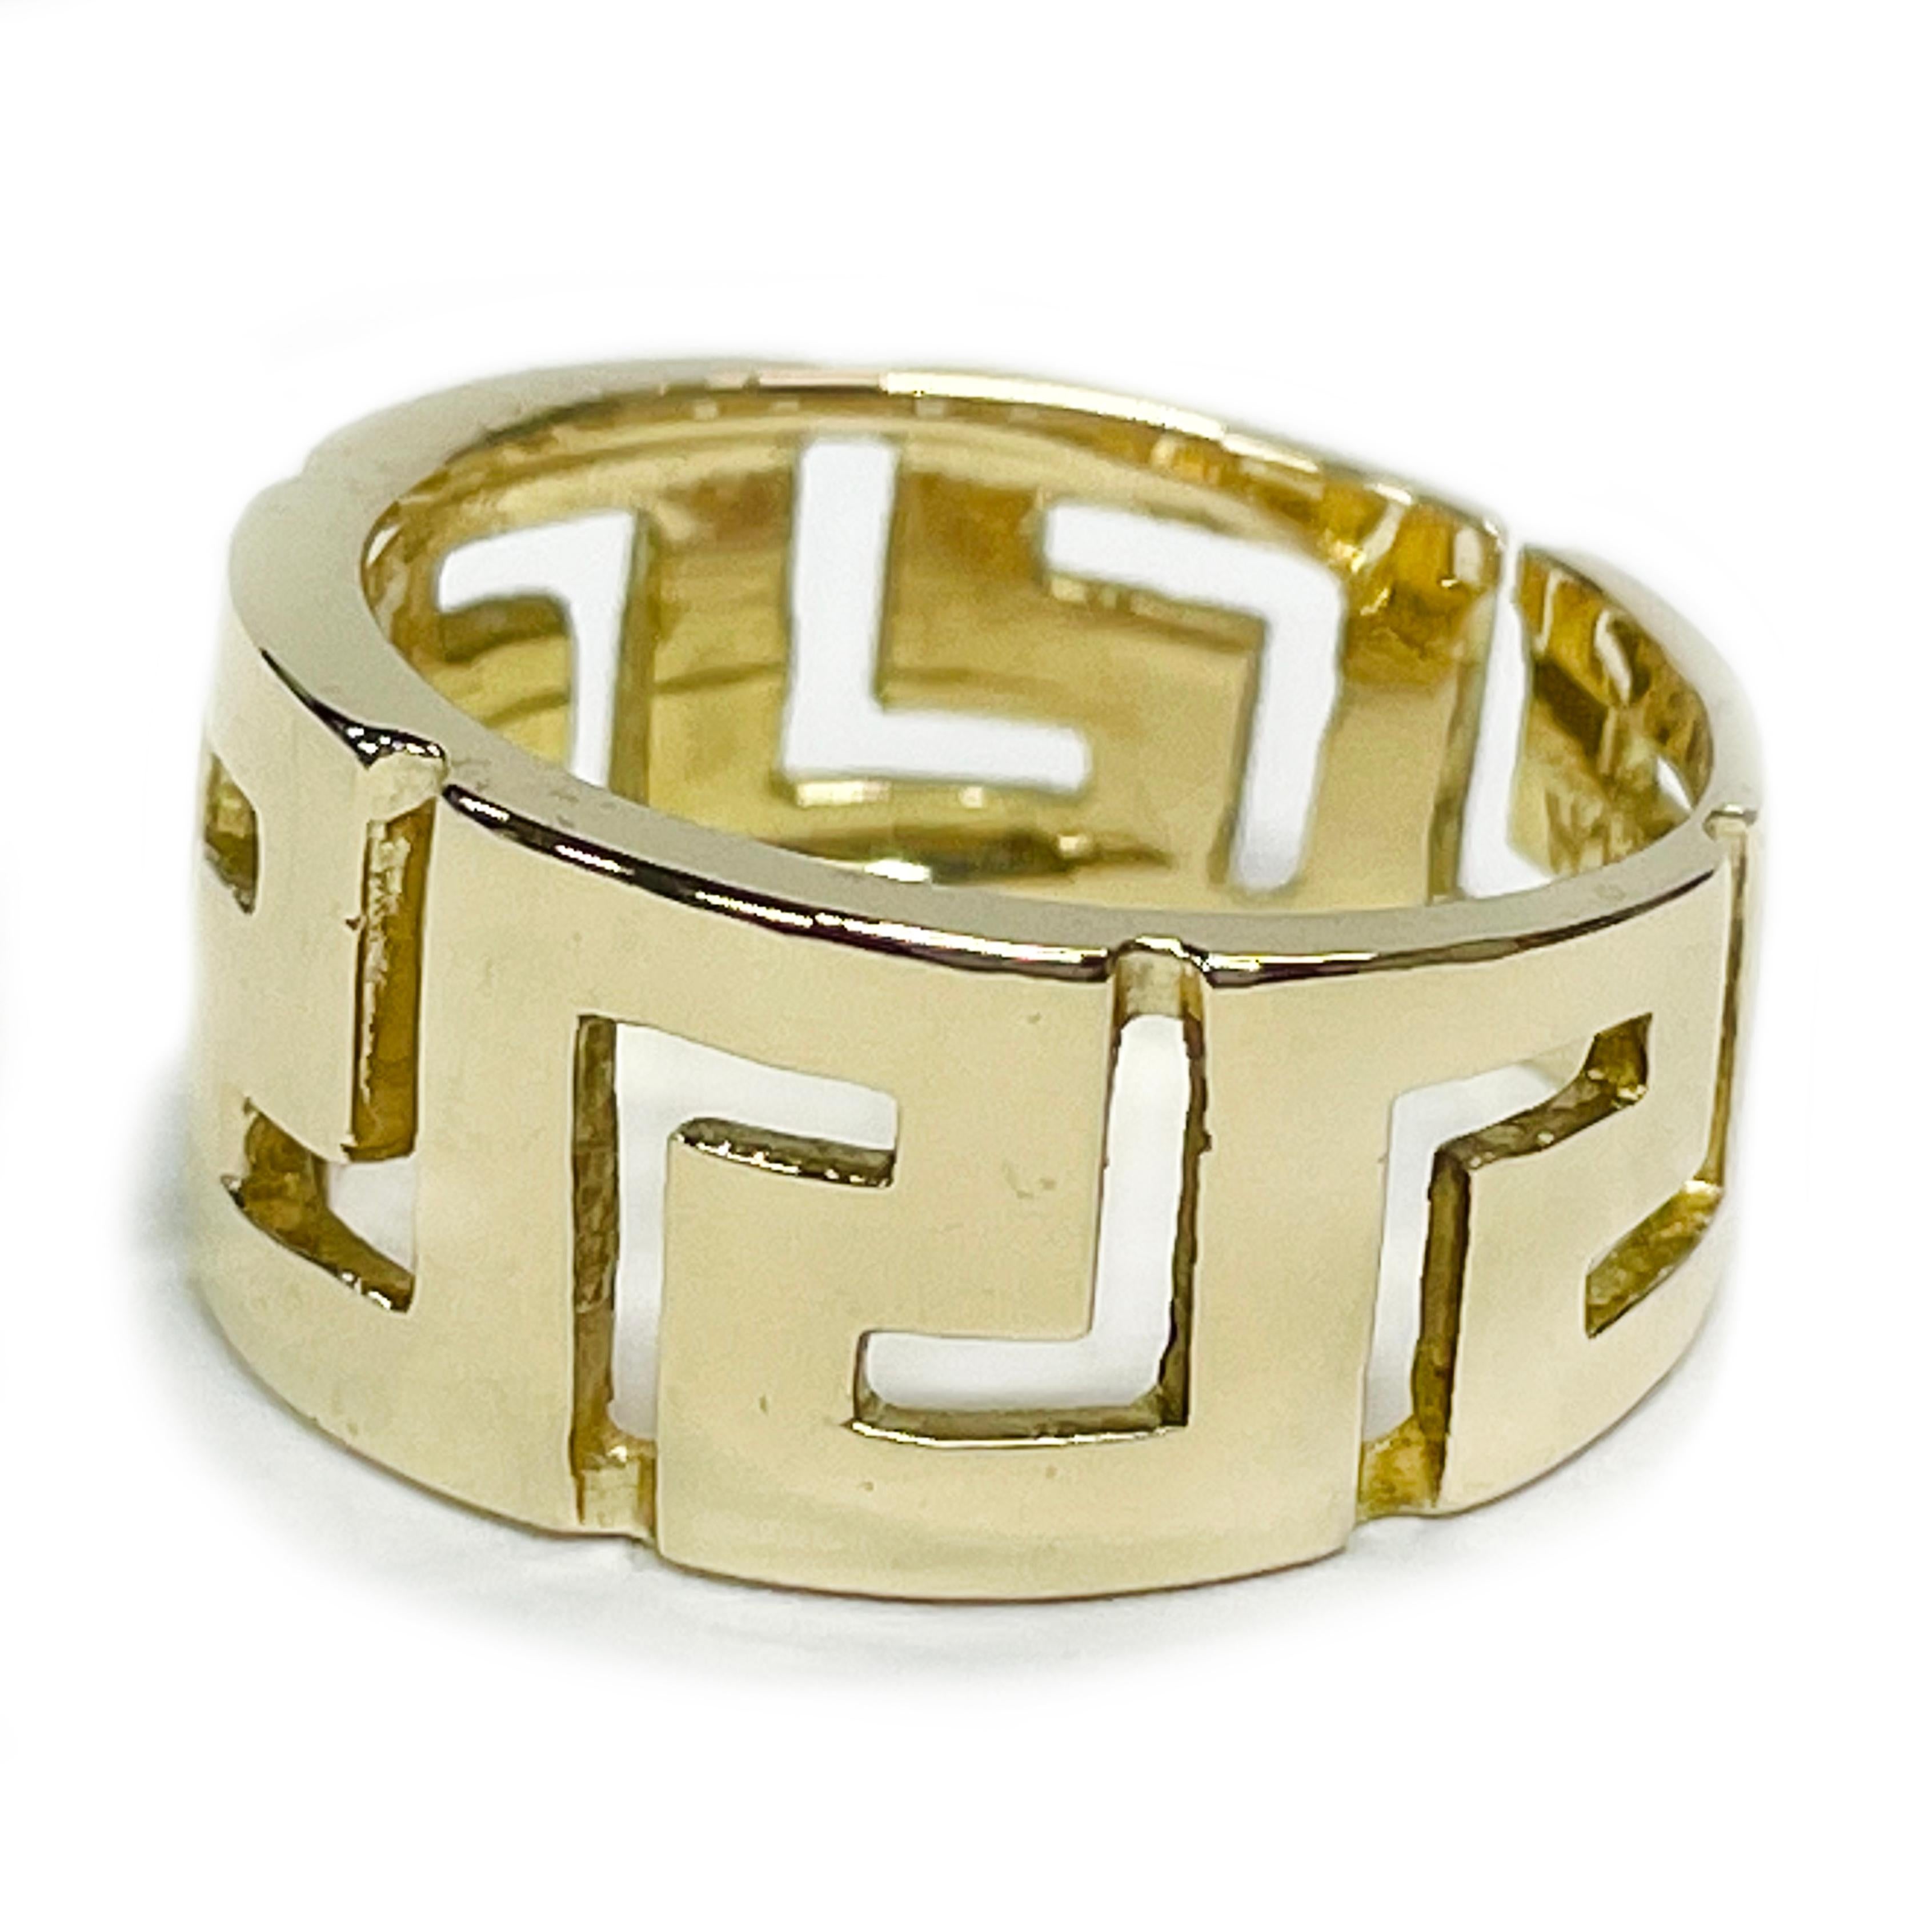 14 Karat Yellow Gold Greek Key Eternity Ring. This ring features a repeat pattern of Greek Keys cut away on the band. The tapered ring ranges in width from 10 to 7.5mm. The ring has an overall smooth shiny finish. Stamped on the inside of the band